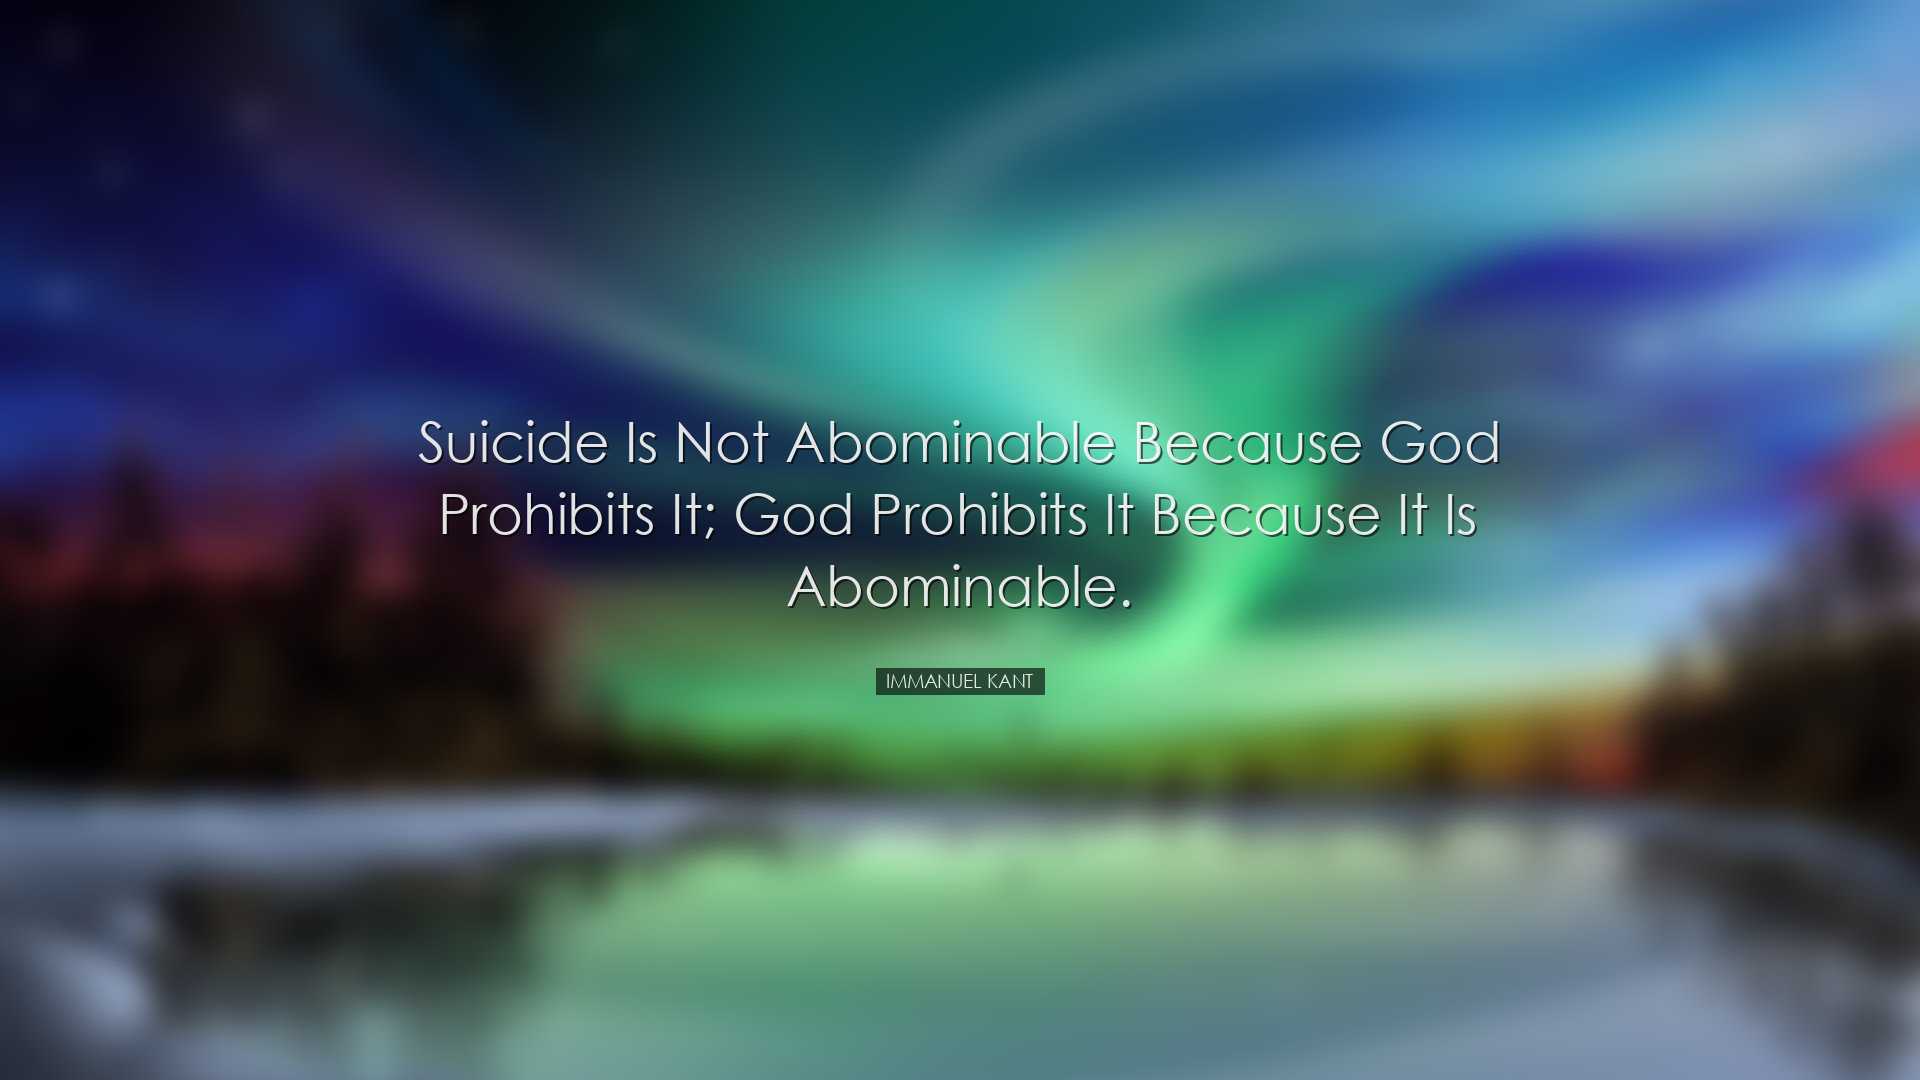 Suicide is not abominable because God prohibits it; God prohibits